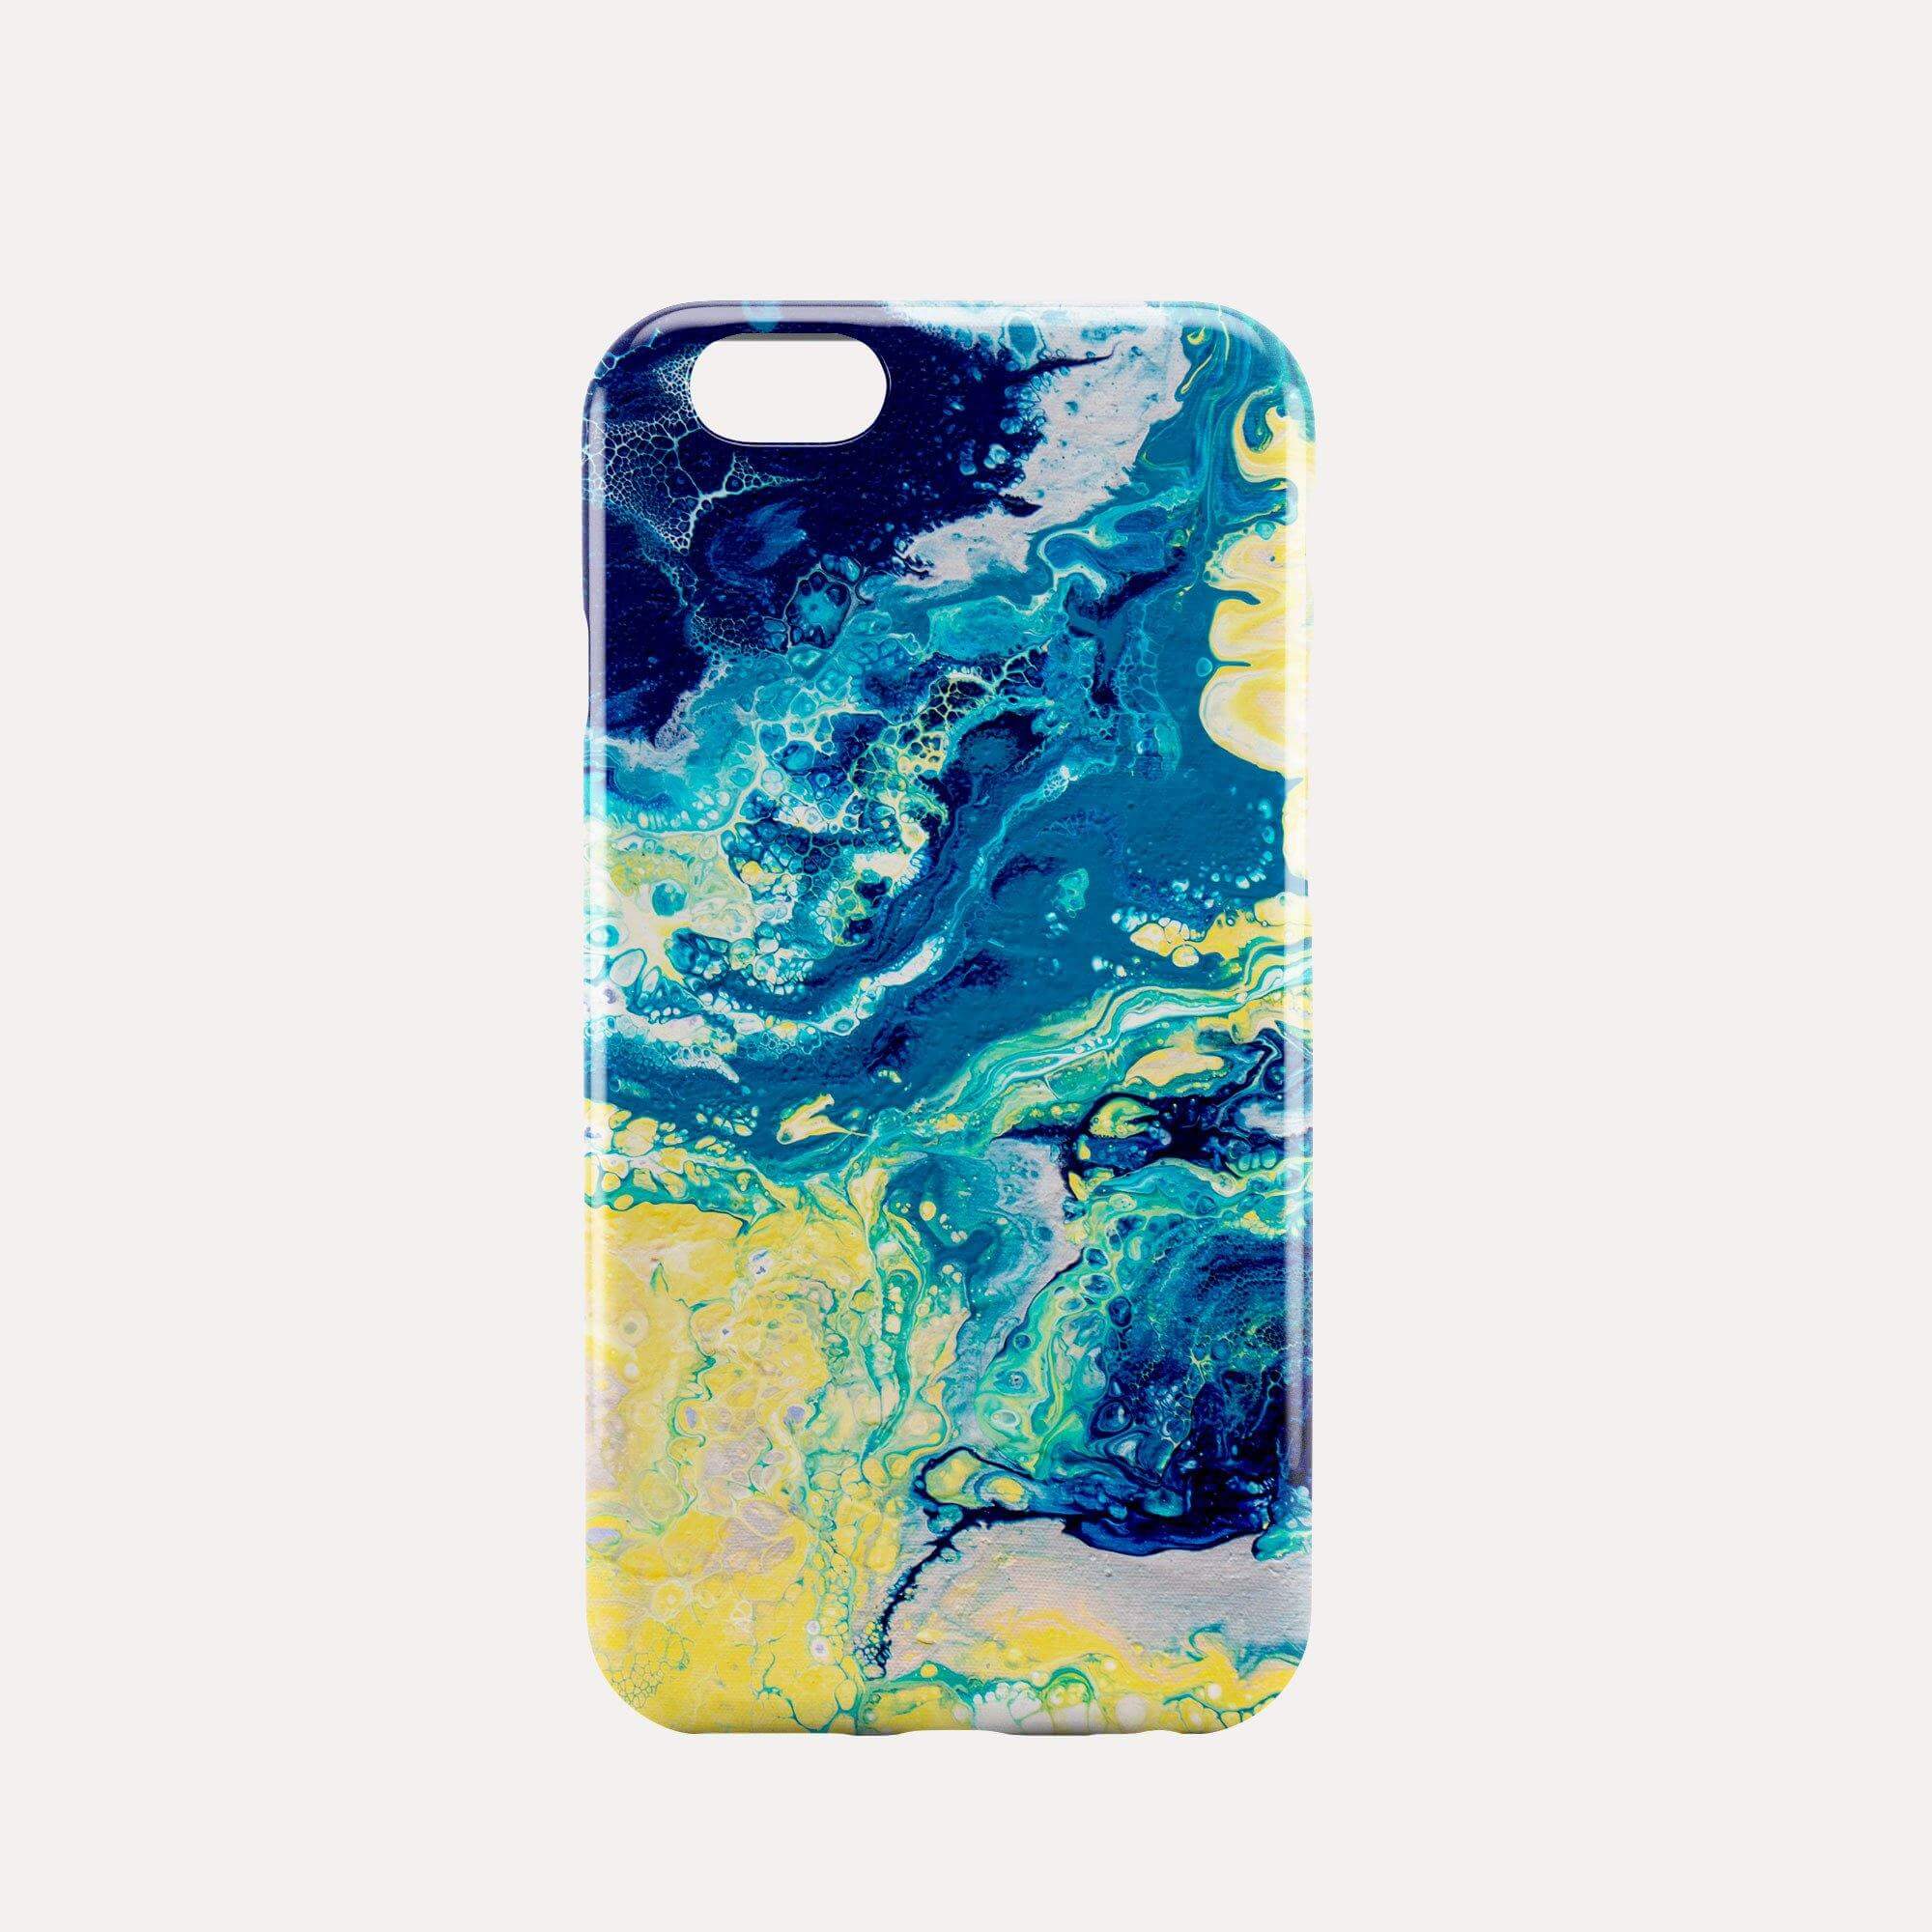 'Rocks & Waves' Yellow & Blue iPhone Case - Louise Mead